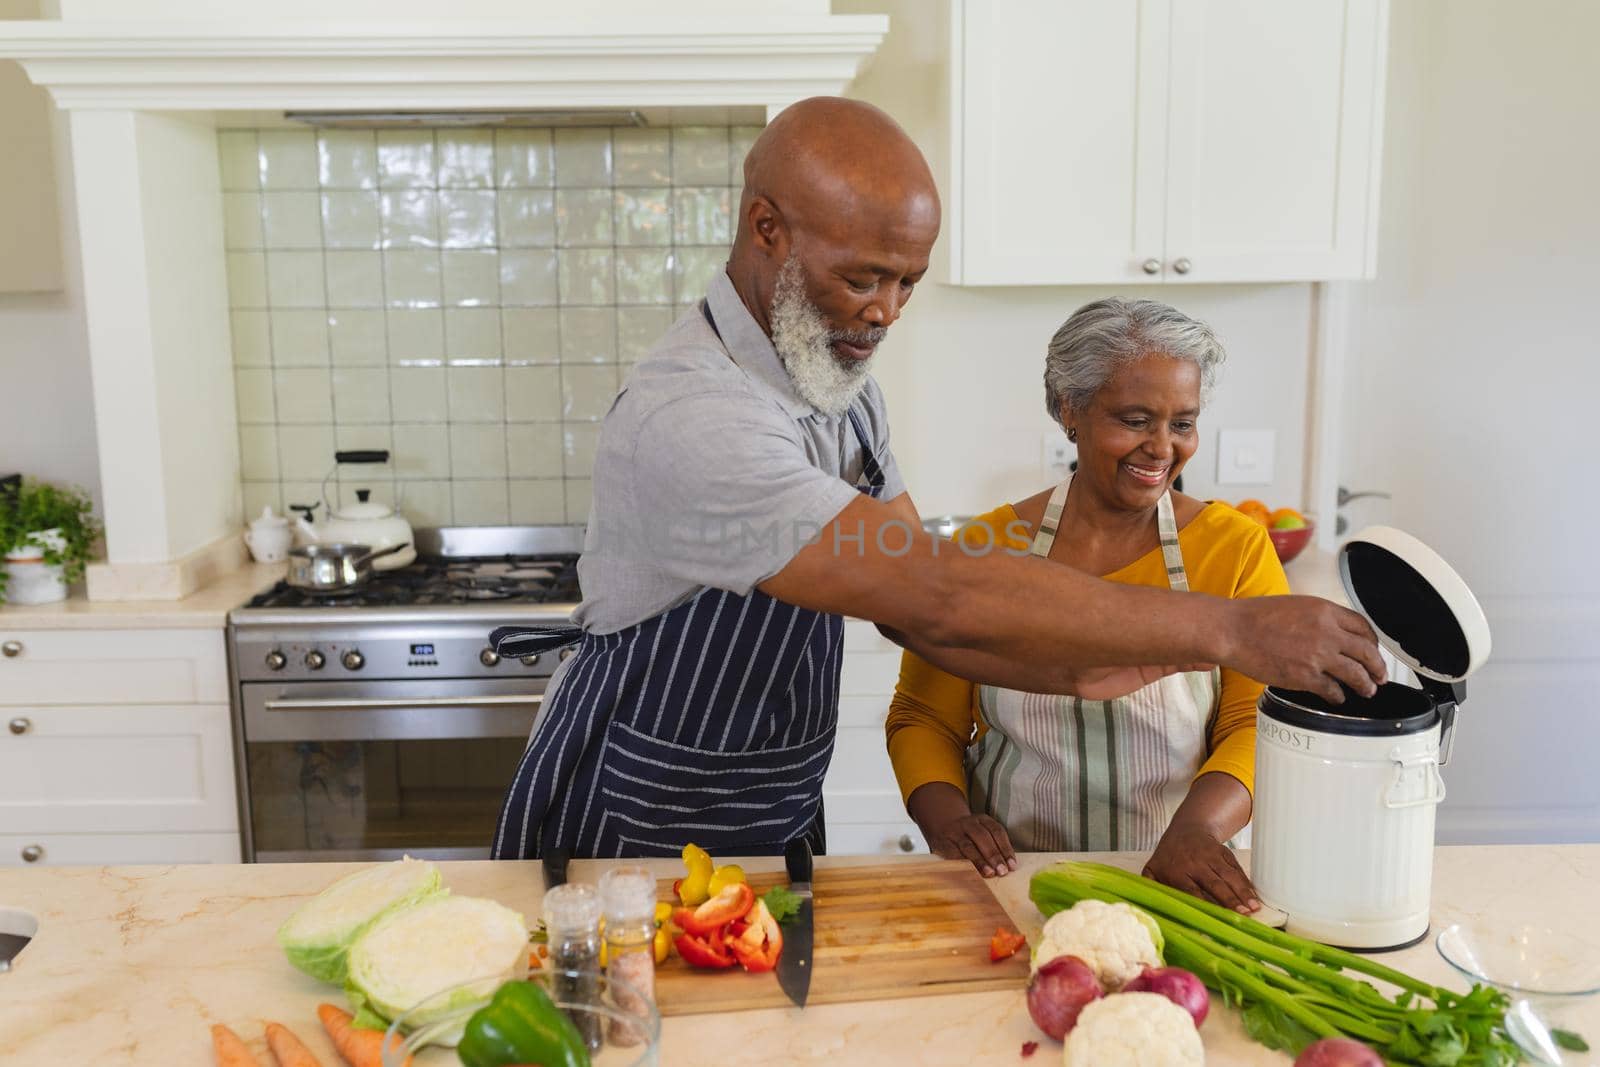 Senior african american couple cooking together in kitchen smiling. retreat, retirement and happy senior lifestyle concept.